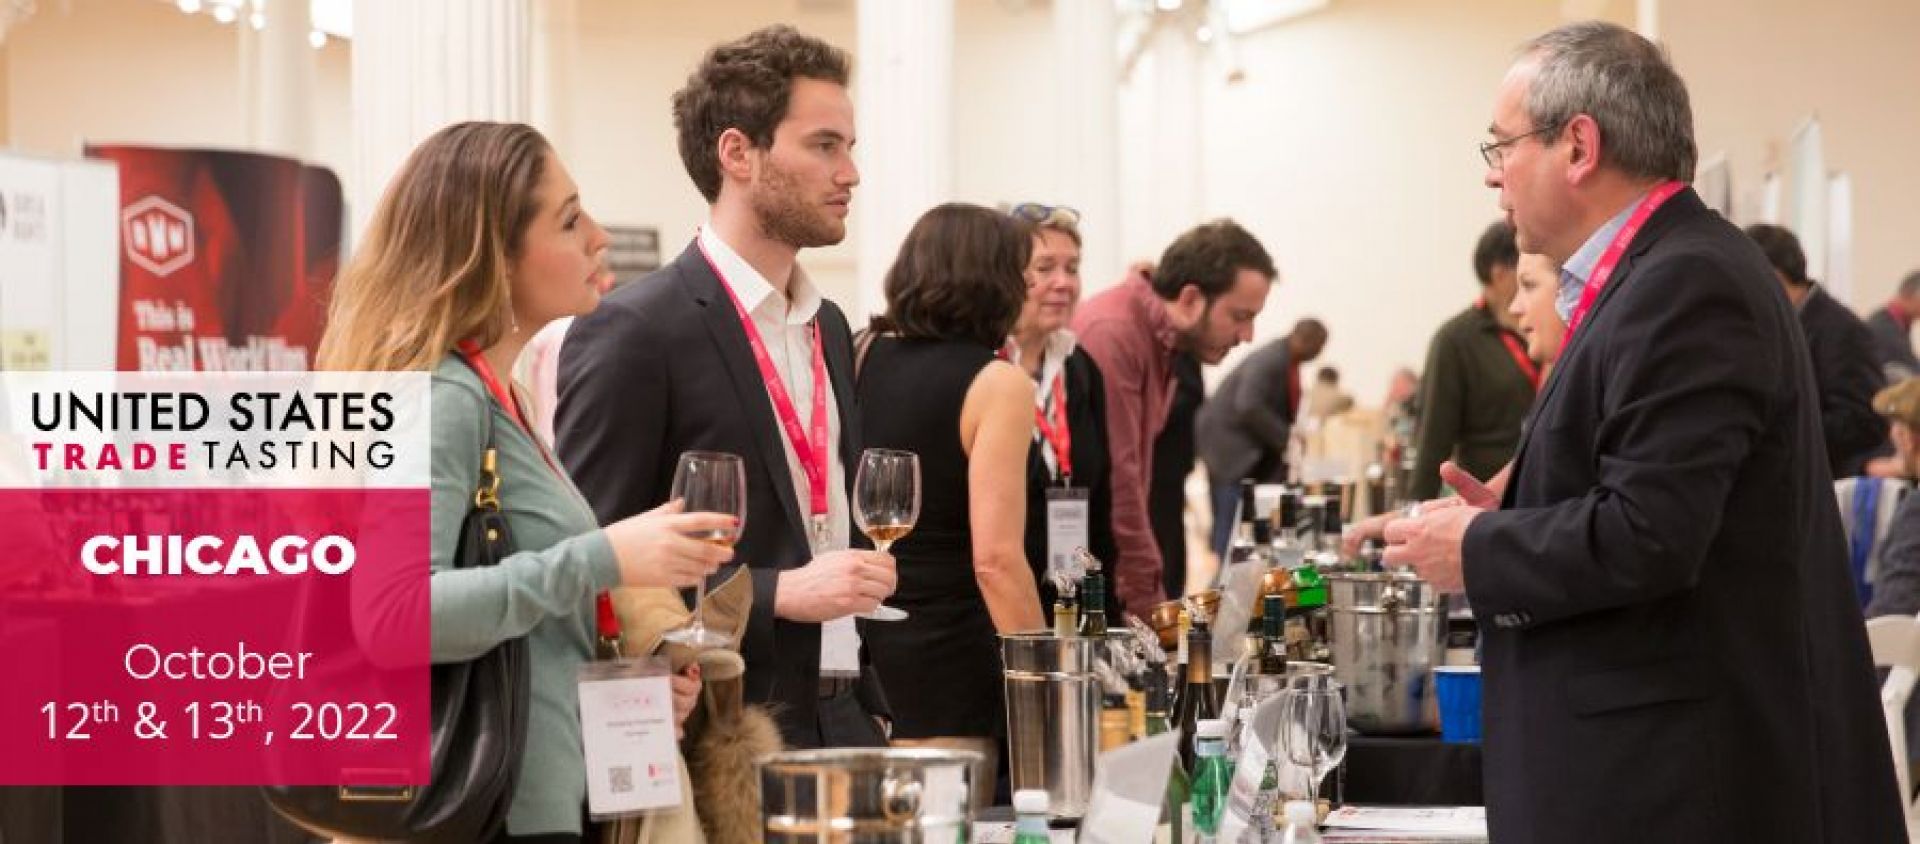 Photo for: Why Attend USA Trade Tasting 2022?